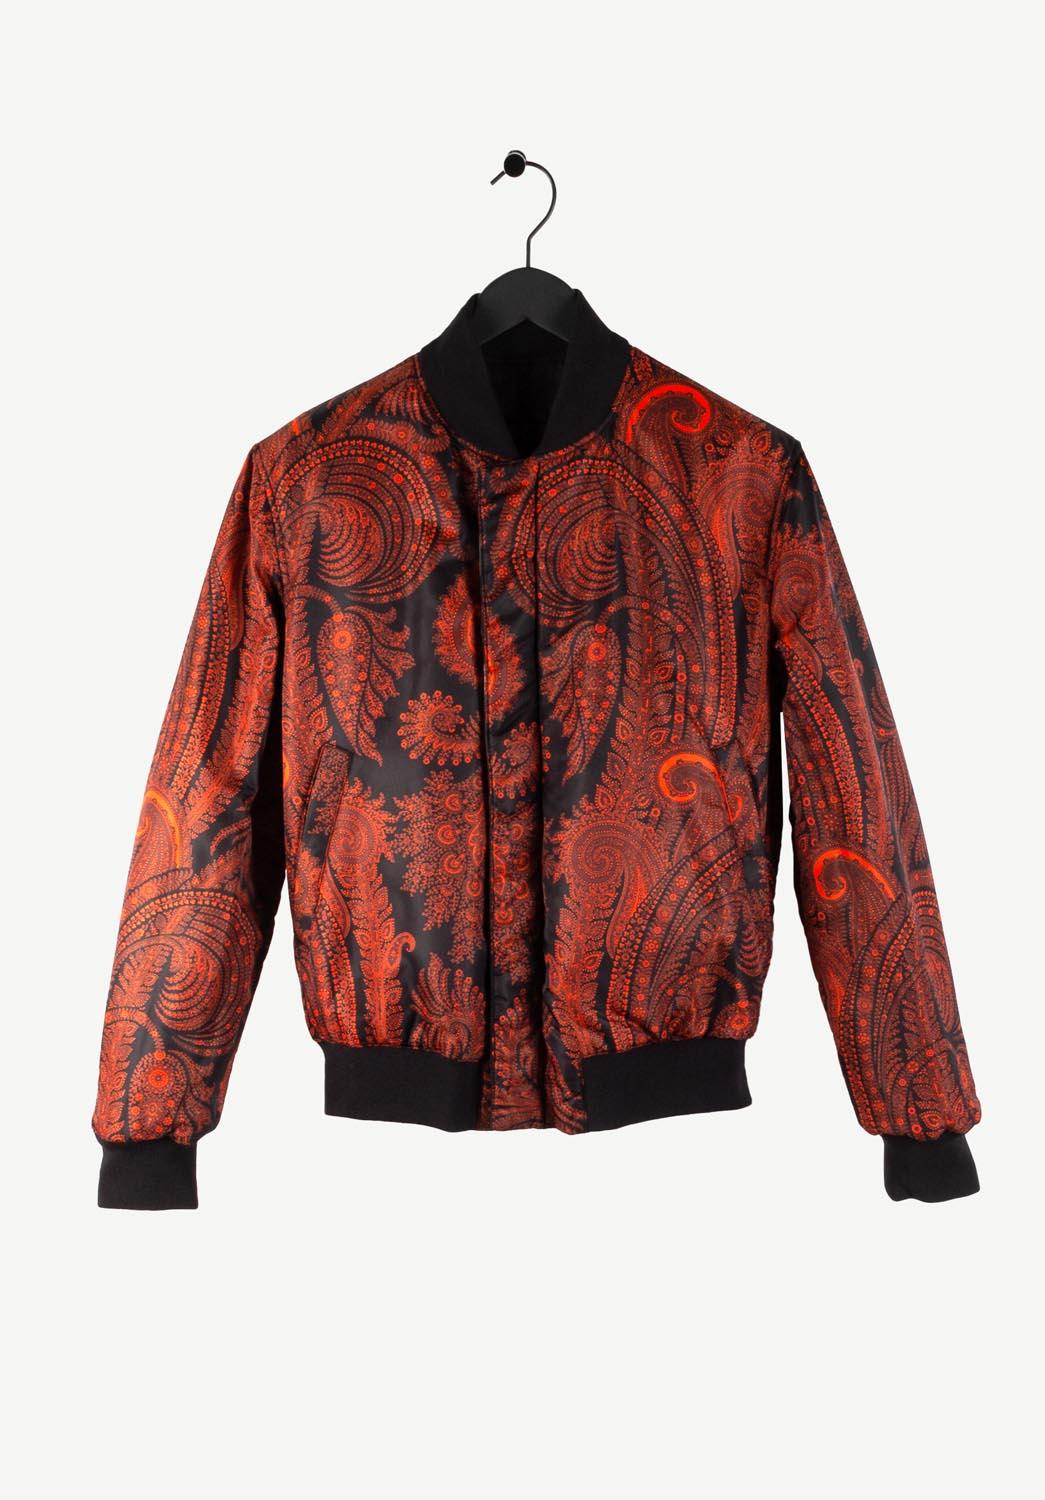 Item for sale is 100% genuine Givenchy Reversible Erika Bomber Men Jacket, S291
Color: Black/Orange
(An actual color may a bit vary due to individual computer screen interpretation)
Material: 100% polyamide
Tag size: 46ITA (runs M)
This jacket is